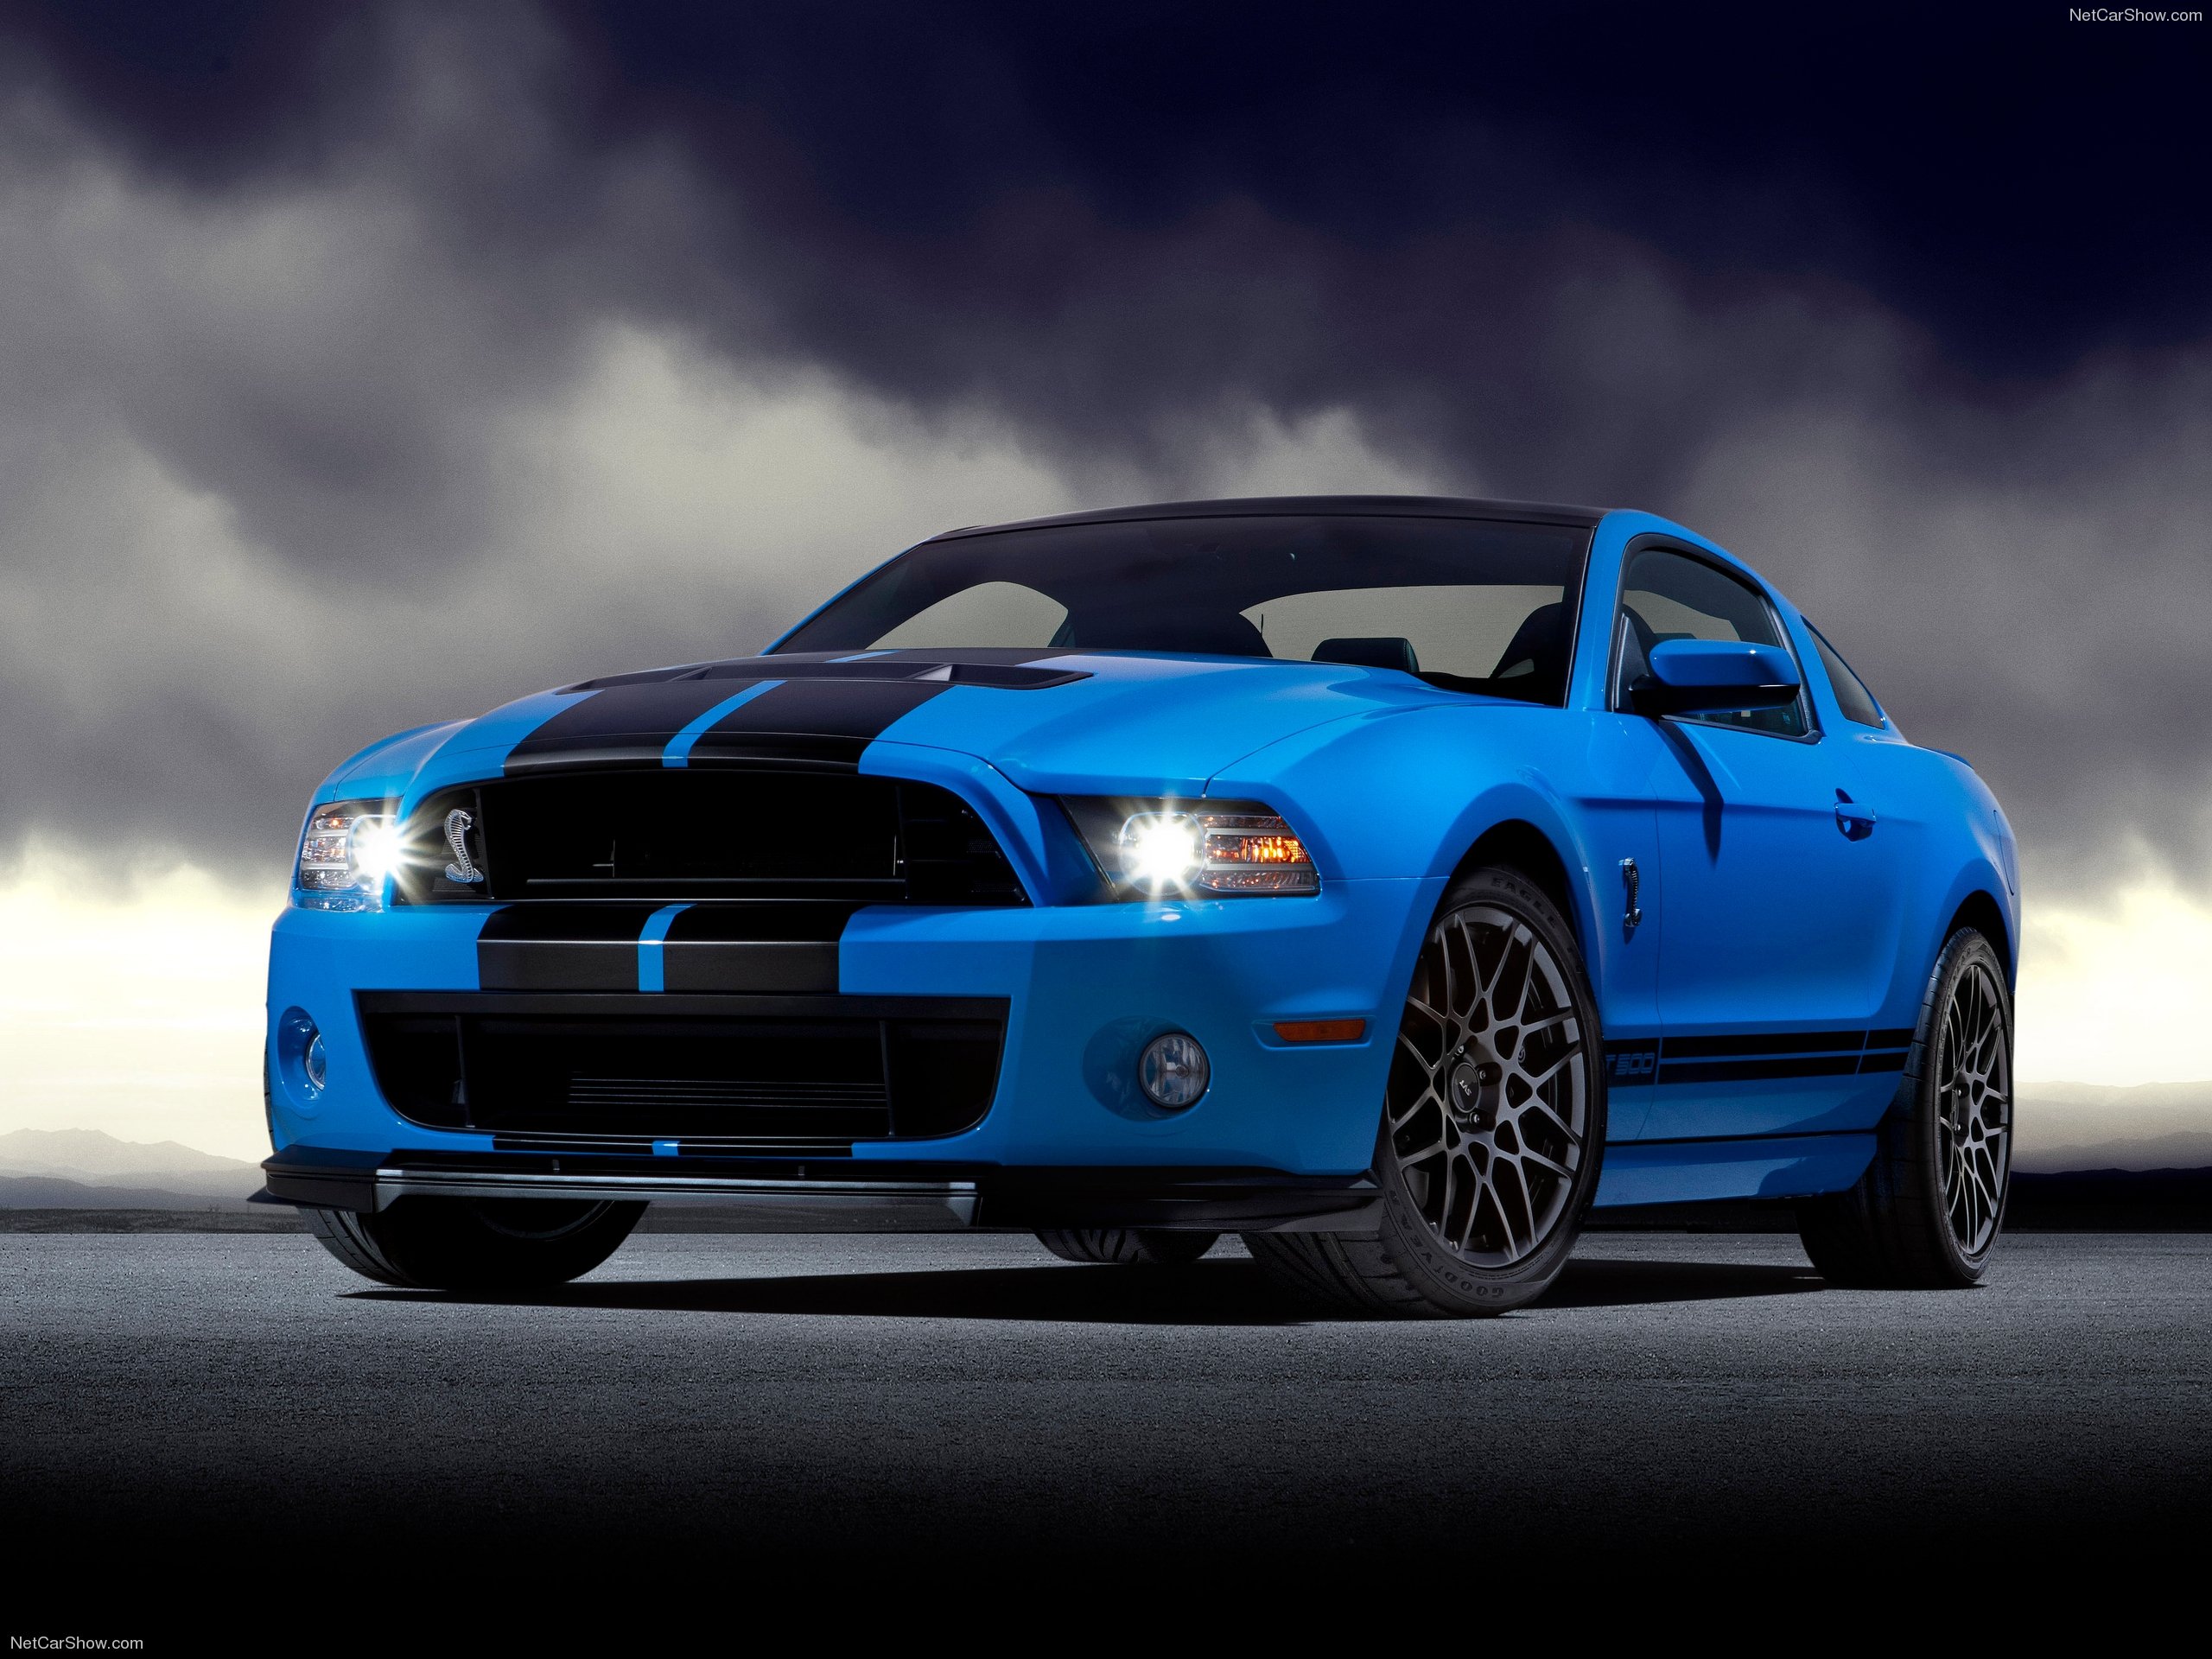 Ford Mustang Shelby Gt500 Exclusive HD Wallpaper